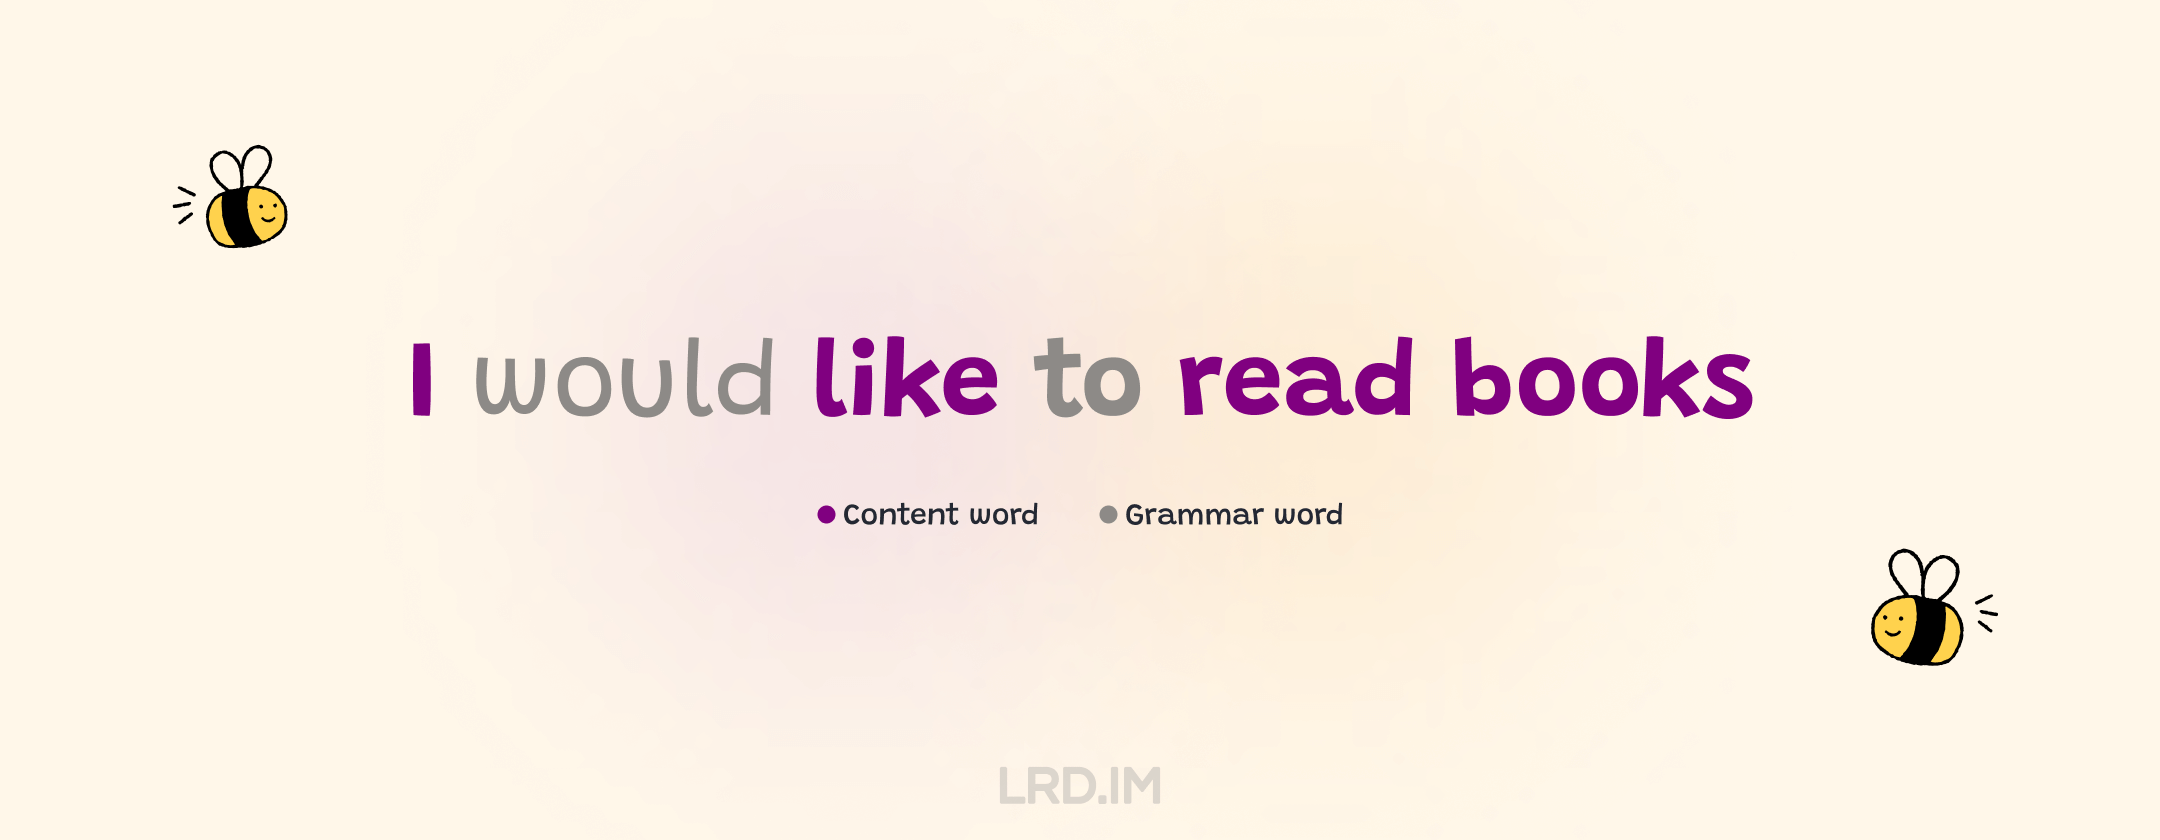 In the sentence "I would like to read books," the content words are "I", "like," "read," and "books," while the grammar words are "would" and "to."